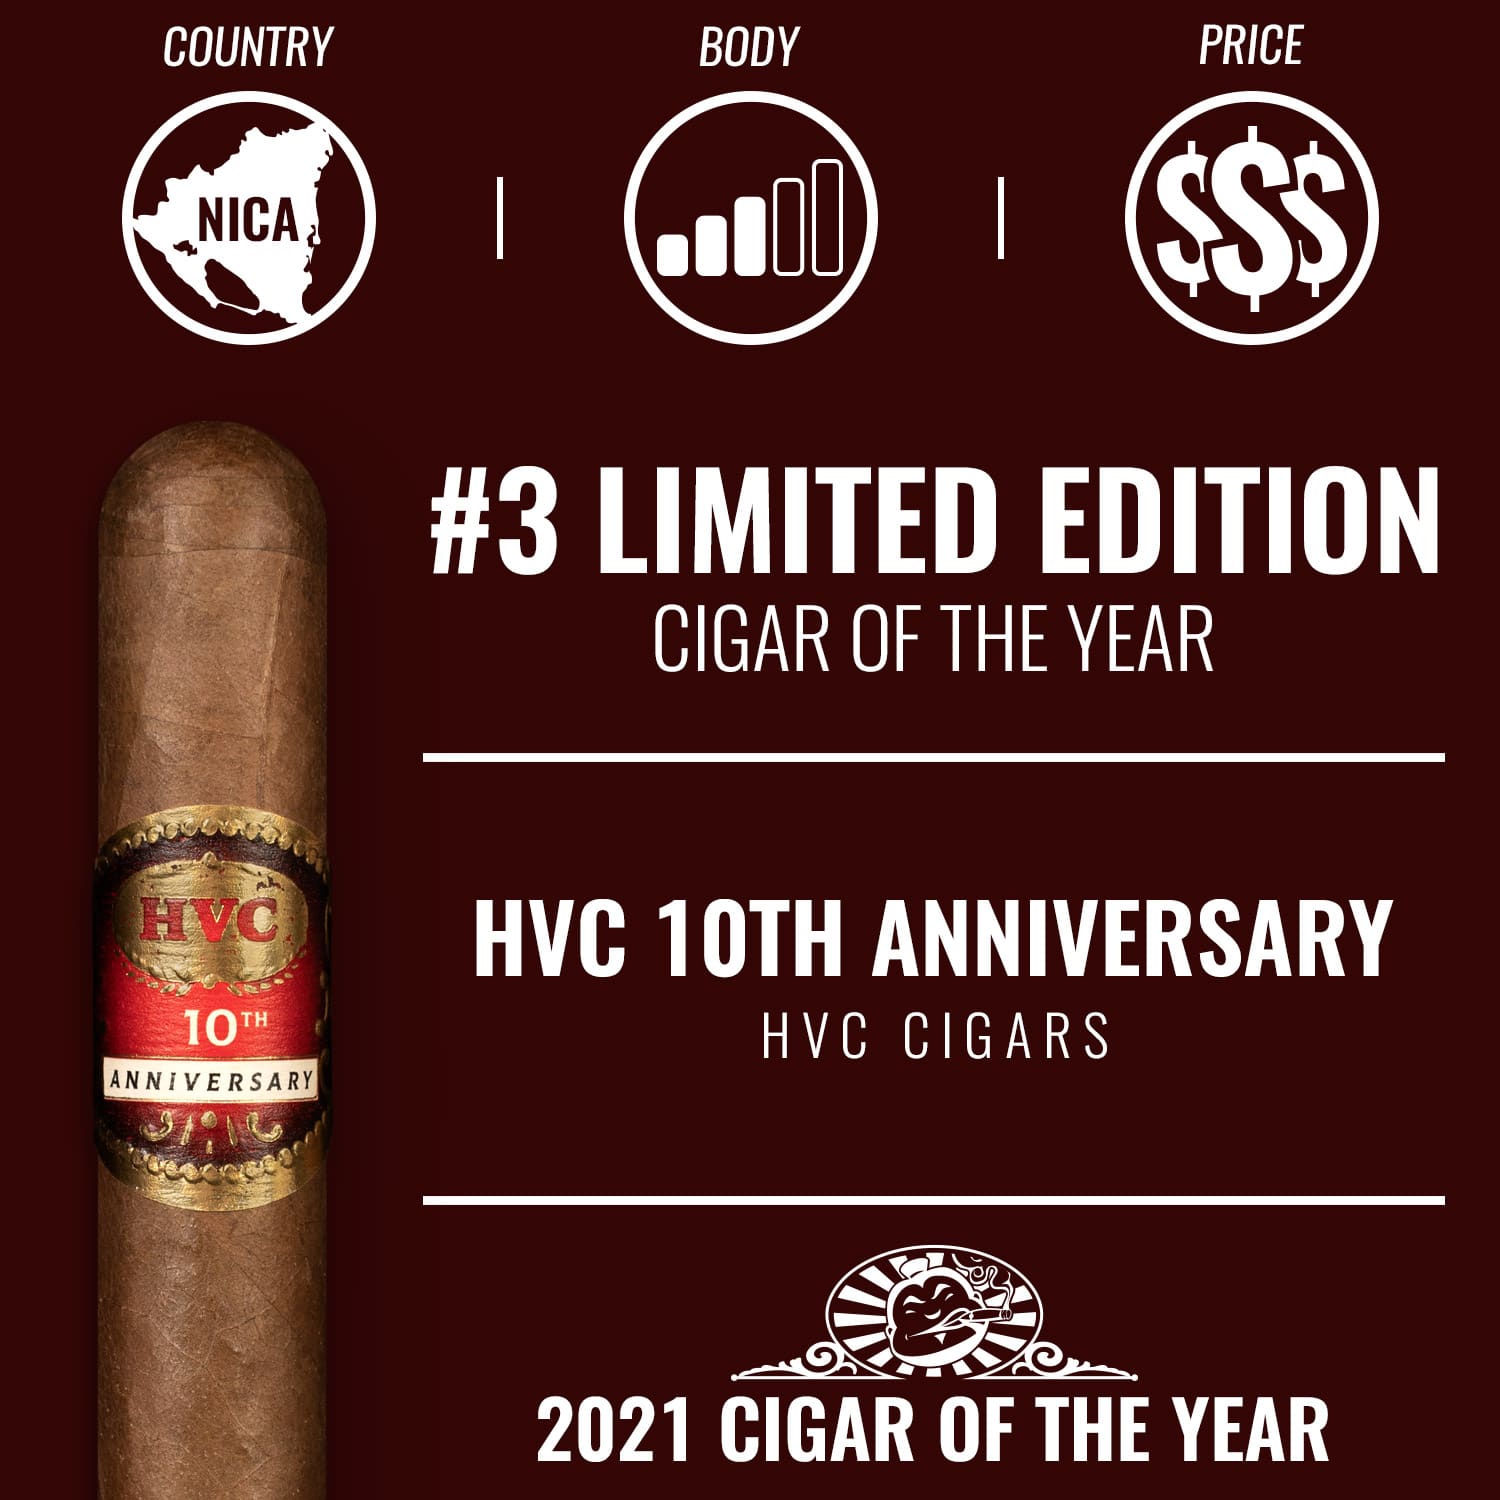 HVC 10th Anniversary No. 3 Limited Edition Cigar of the Year 2021